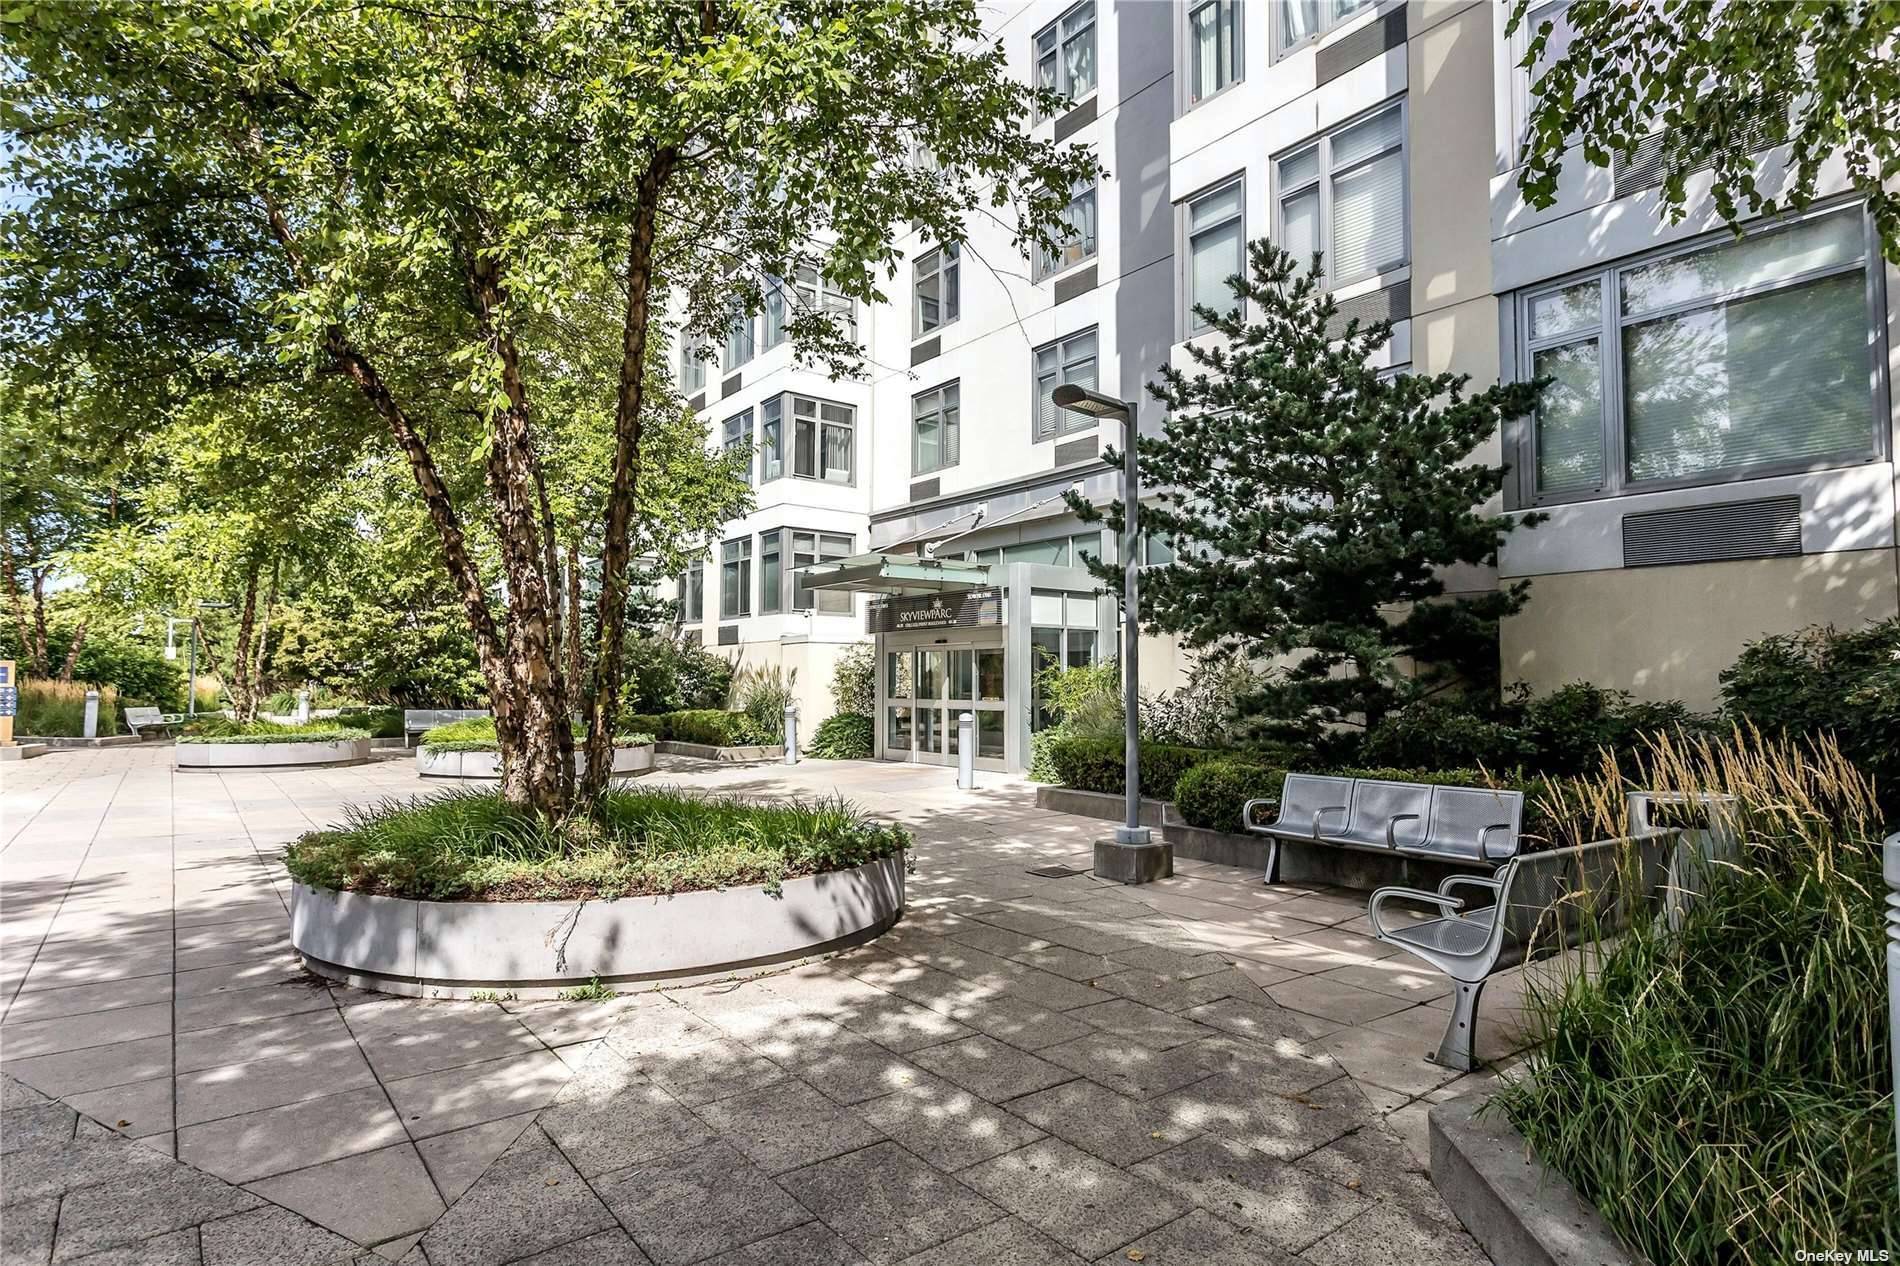 Prime Location ! A Gorgeous Large One Bedroom Condo with City View in Skyview Parc, A Luxury Condominium Complex in Downtown Flushing.